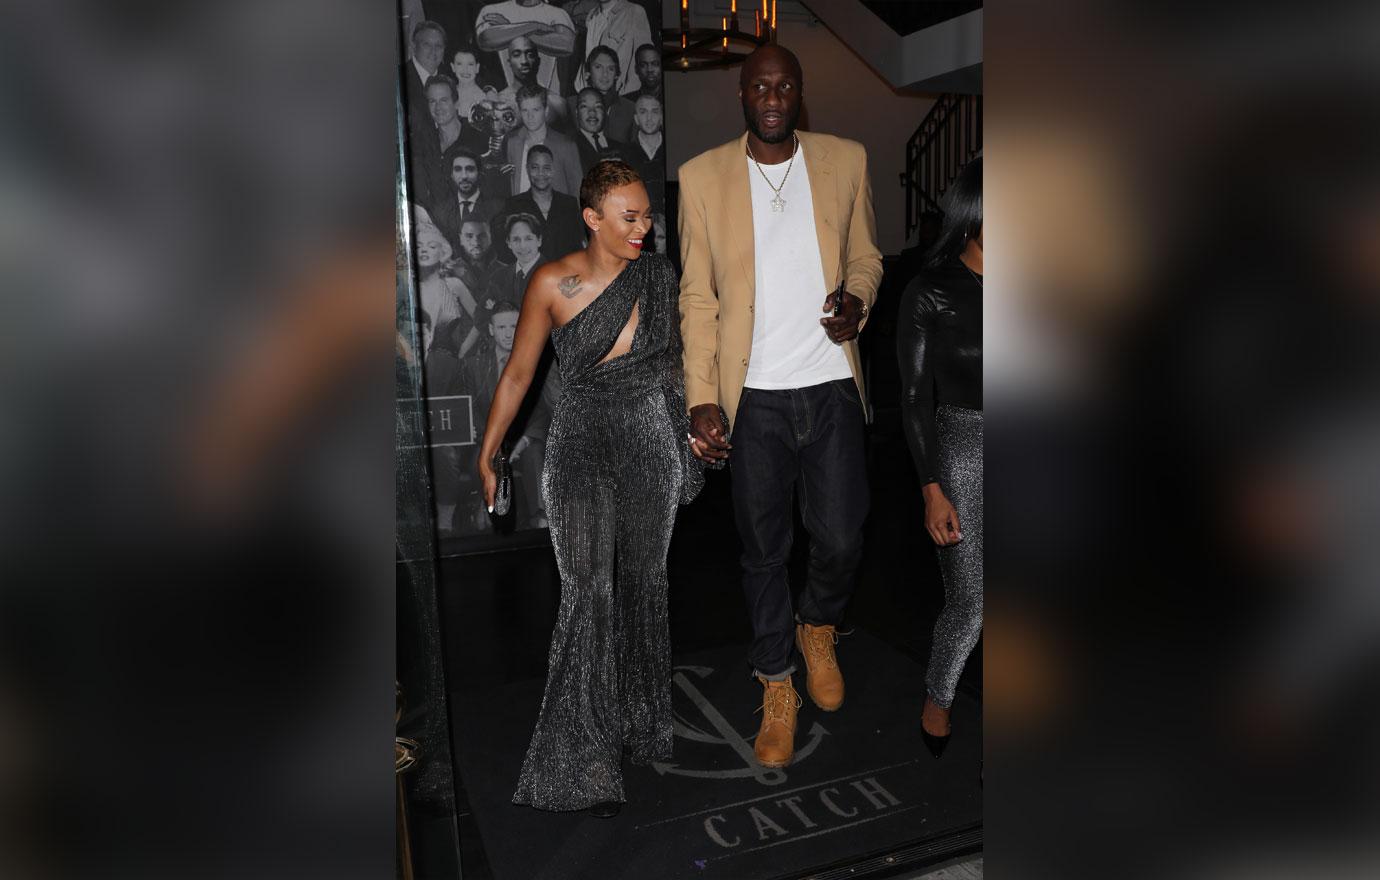 Lamar Odom S Daughter Claims His Fiancée Sabrina Parr Punched Him